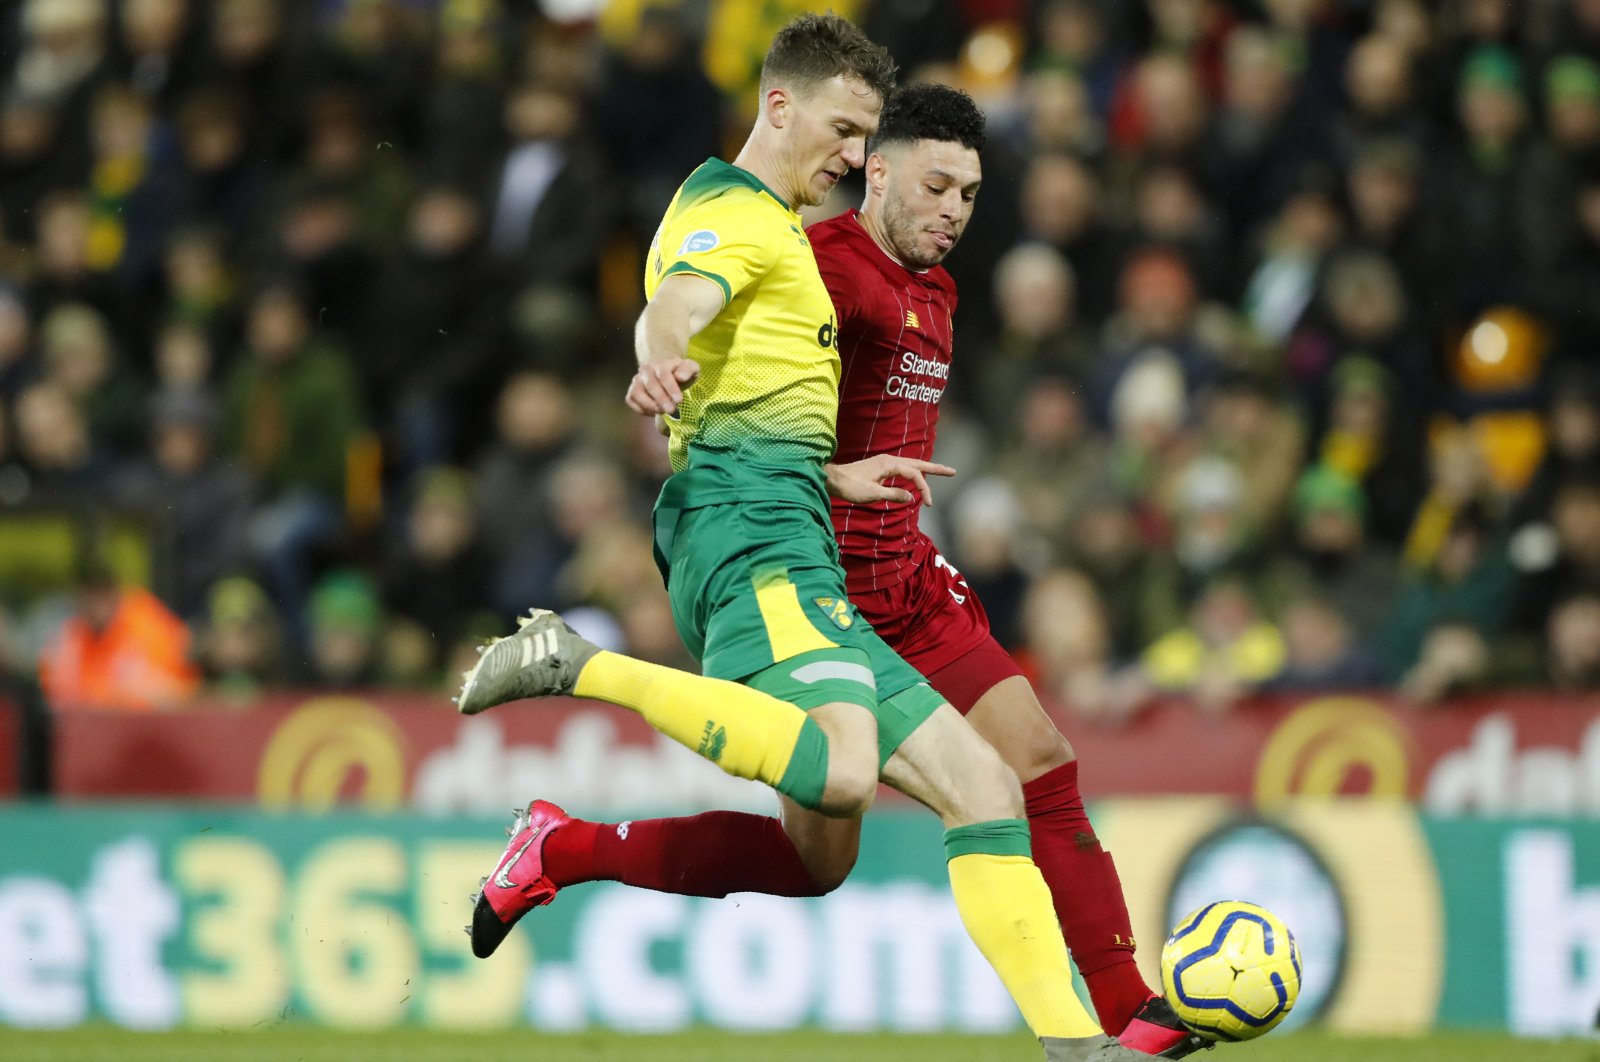 Norwich City's Max Aarons, front, duels for the ball with Liverpool's Alex Oxlade-Chamberlain during a Premier League match in Norwich, England, Feb. 15, 2020. (AP Photo)